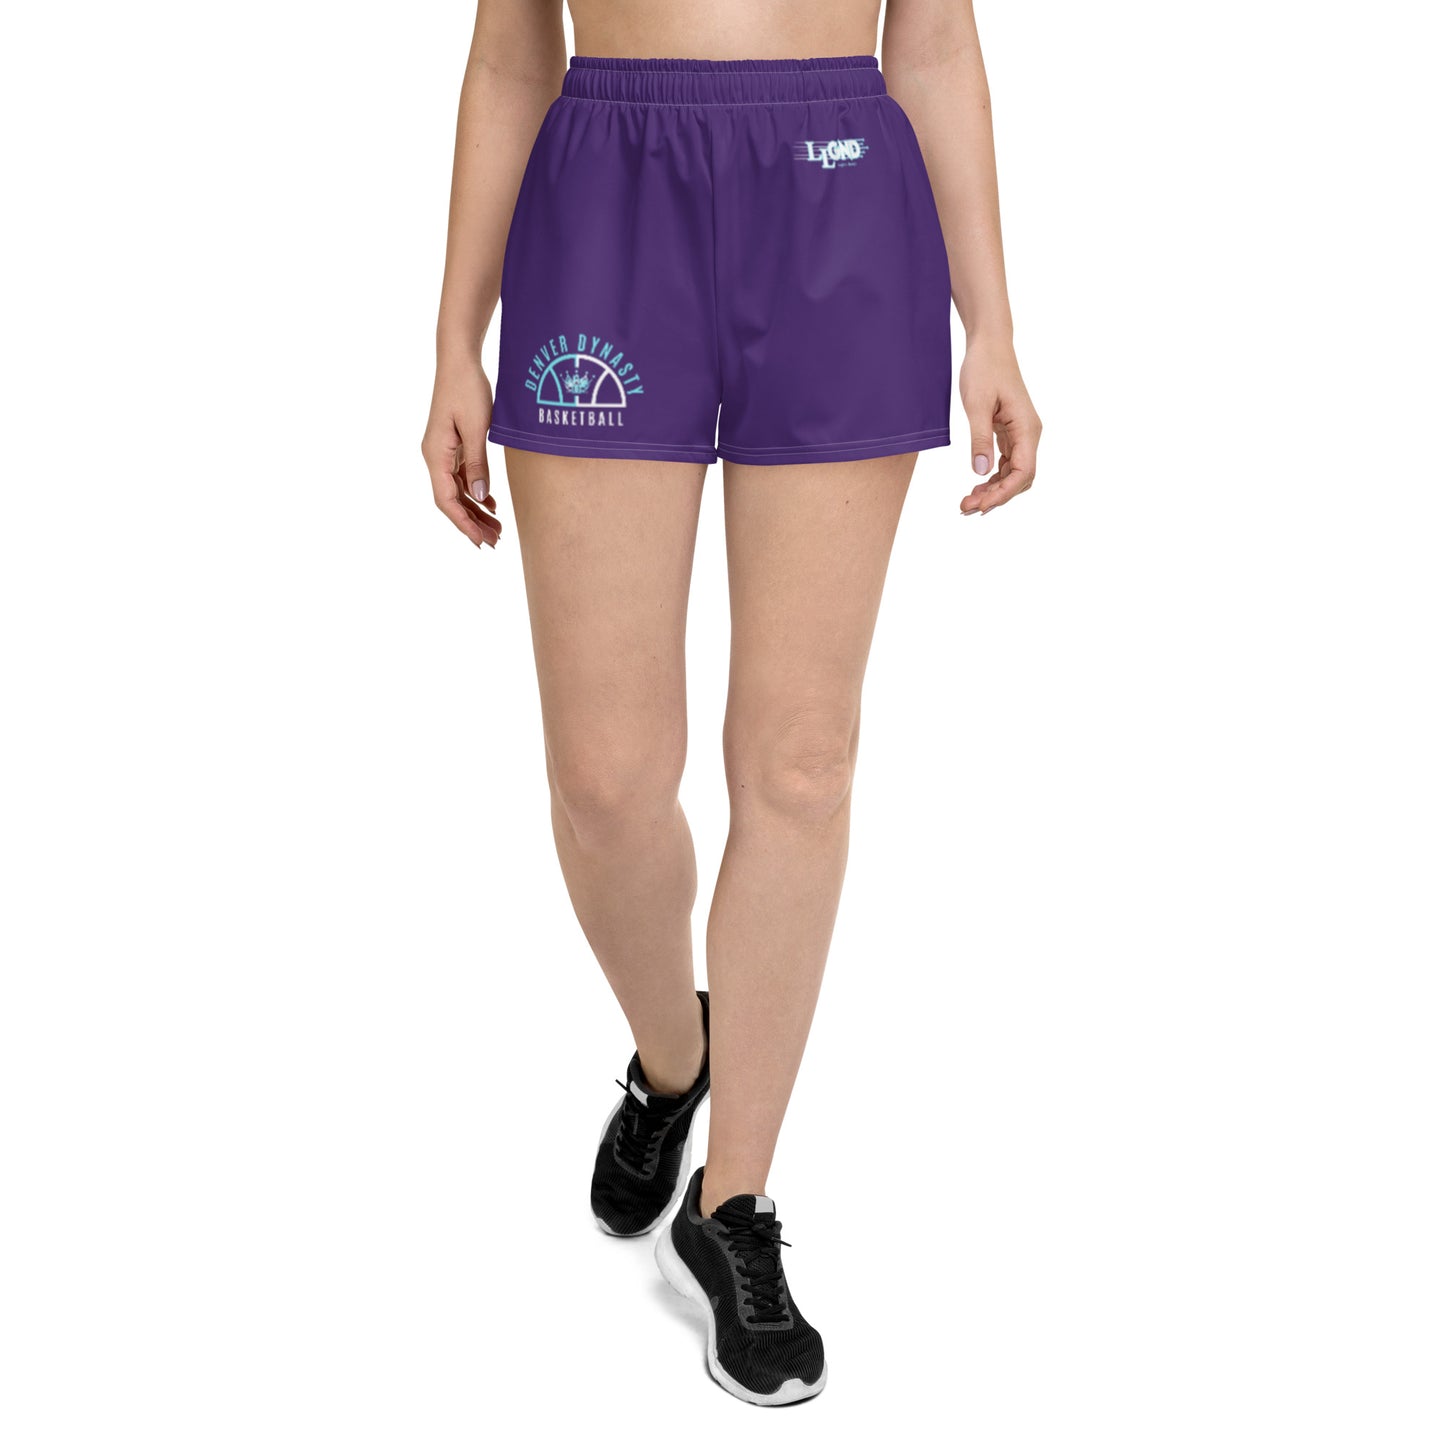 DYNASTY RECYCLED SHORTS (TEAM PURPLE)